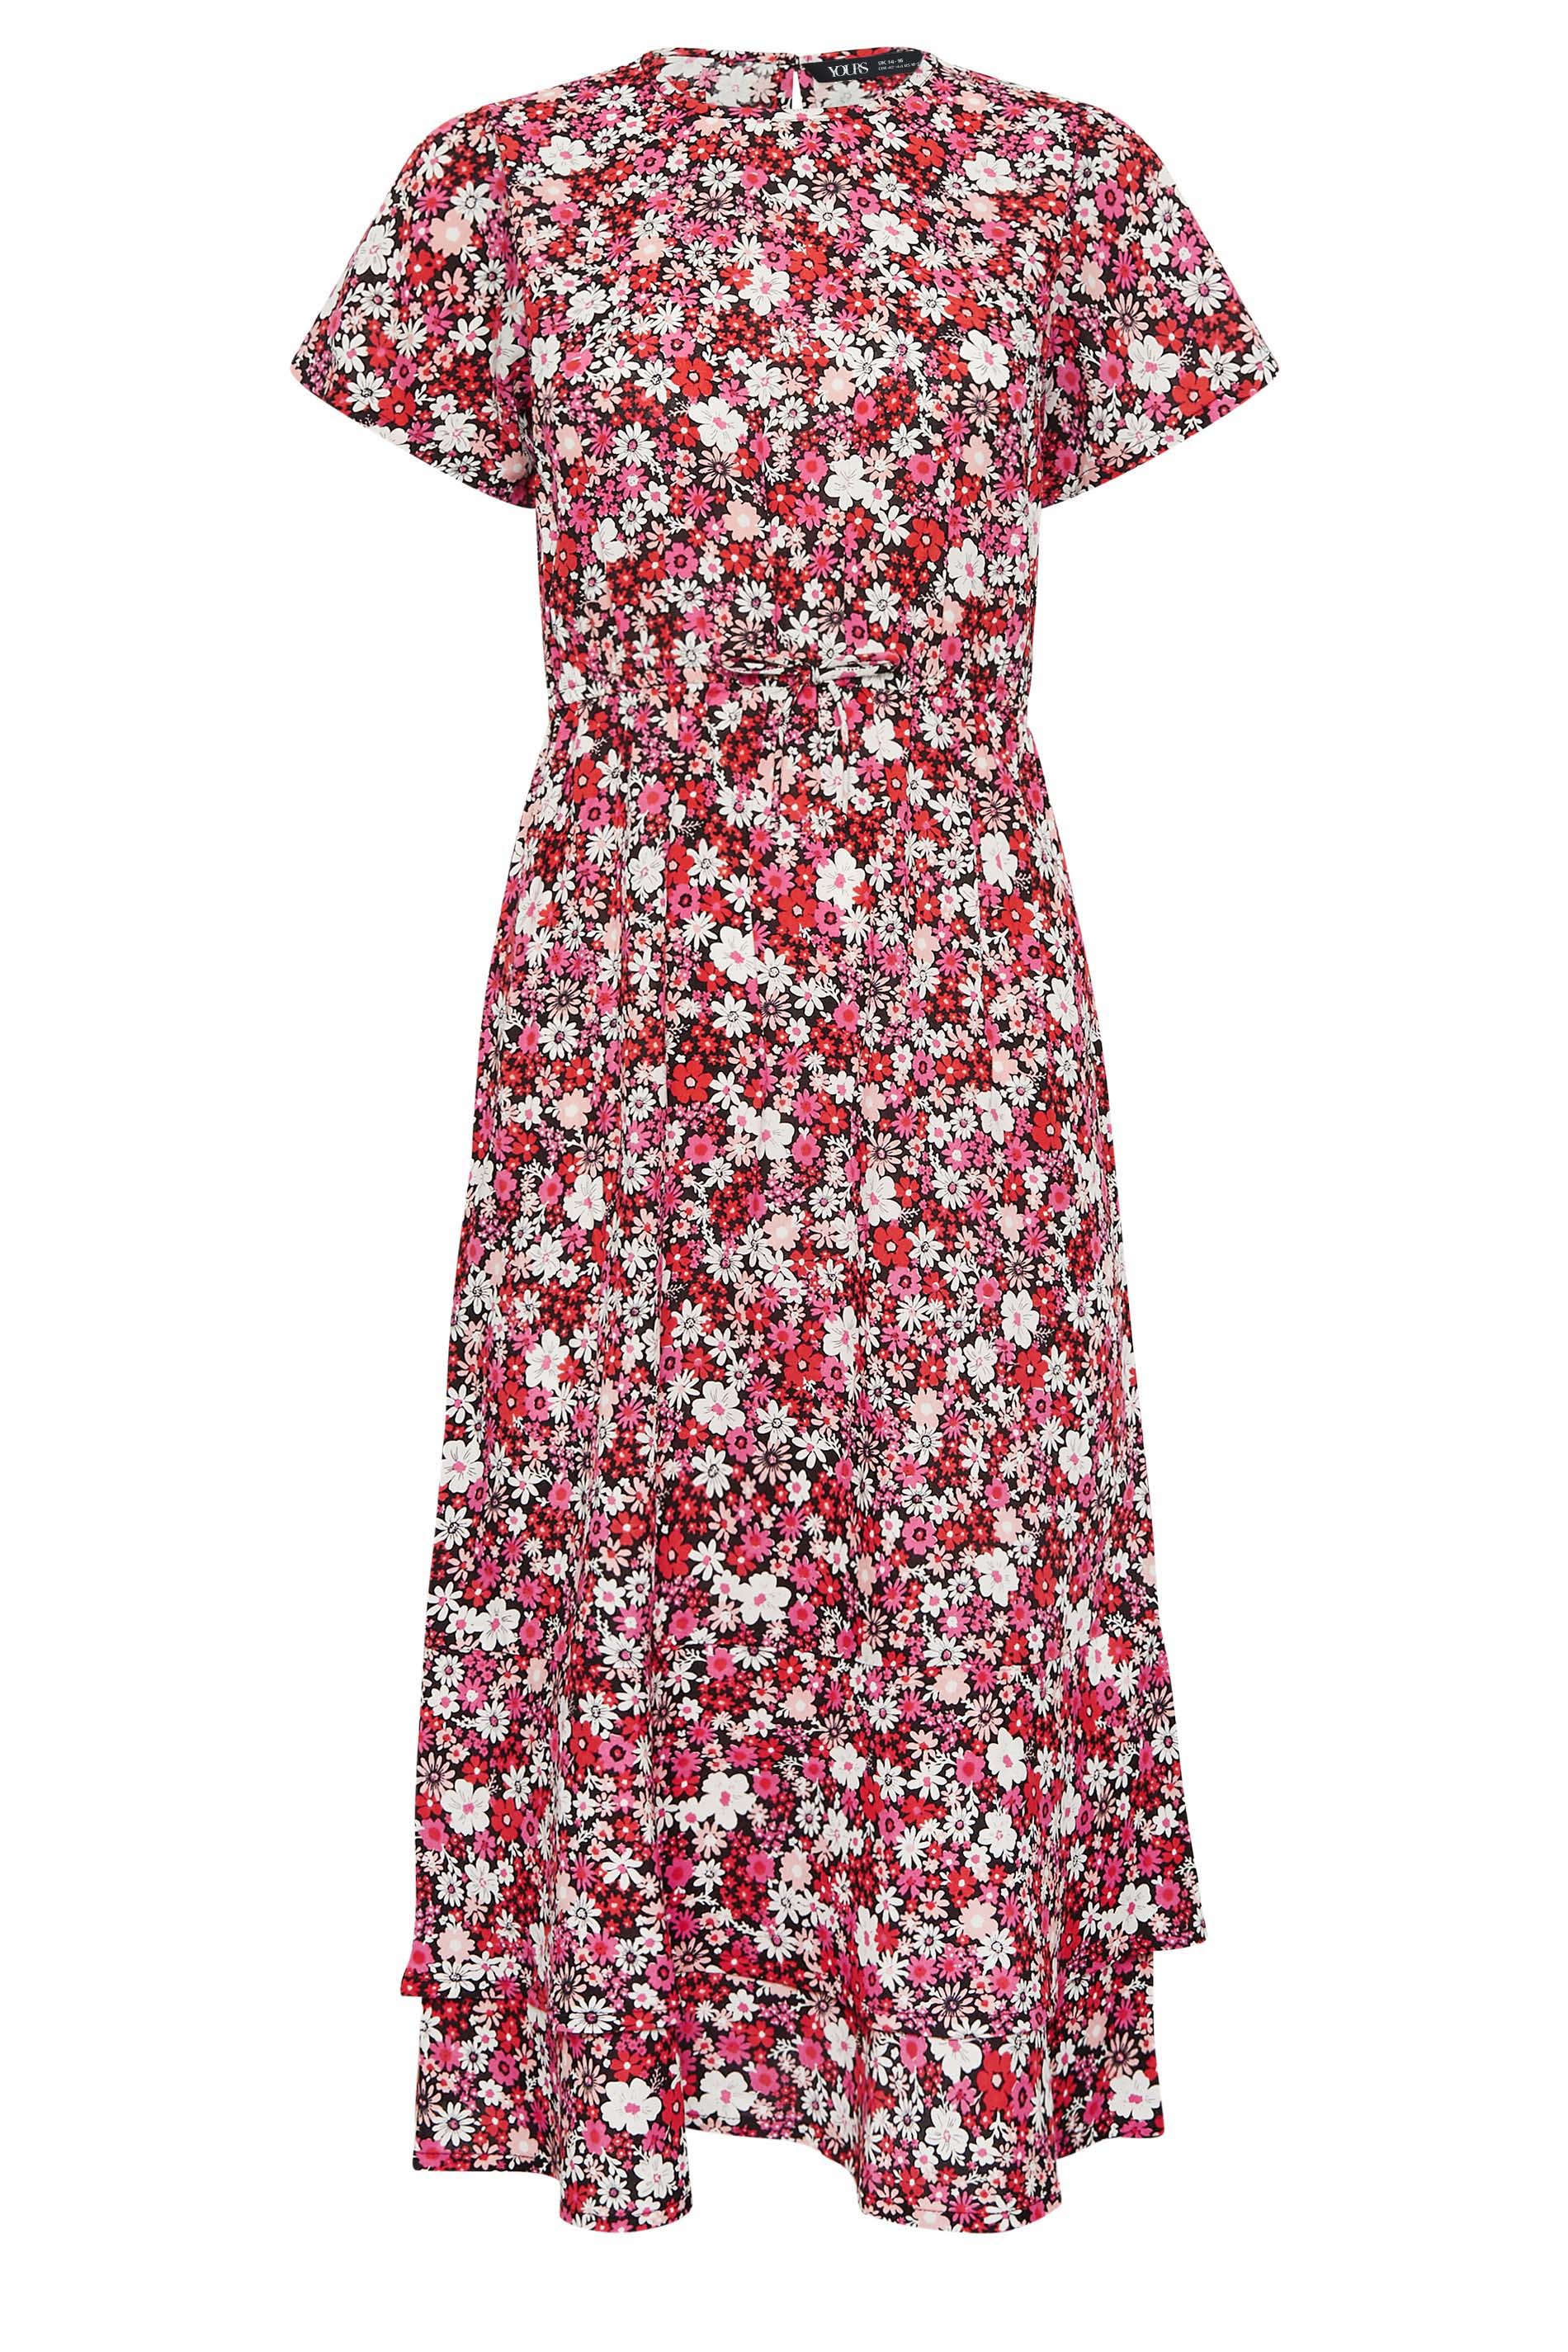 YOURS PETITE Plus Size Pink Floral Tie Waist Midaxi Dress | Yours Clothing 1